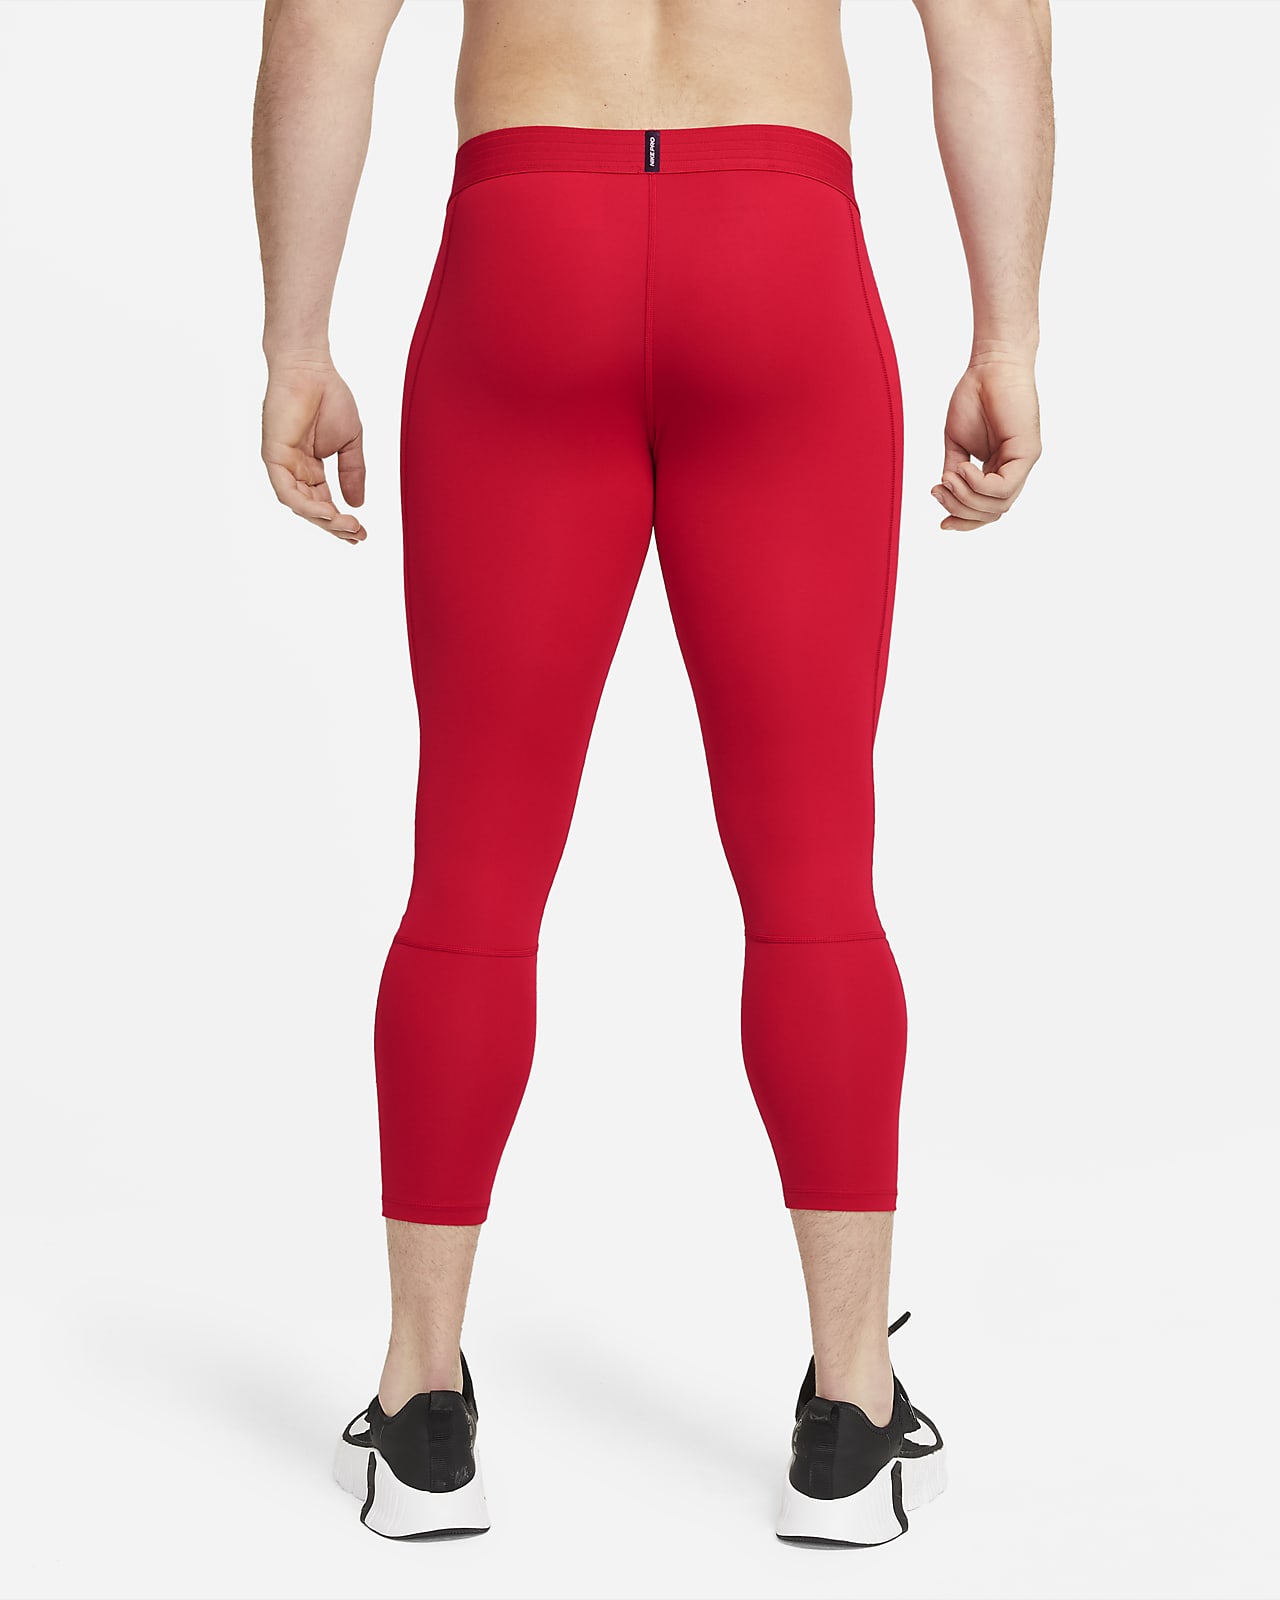 nike compression tights womens